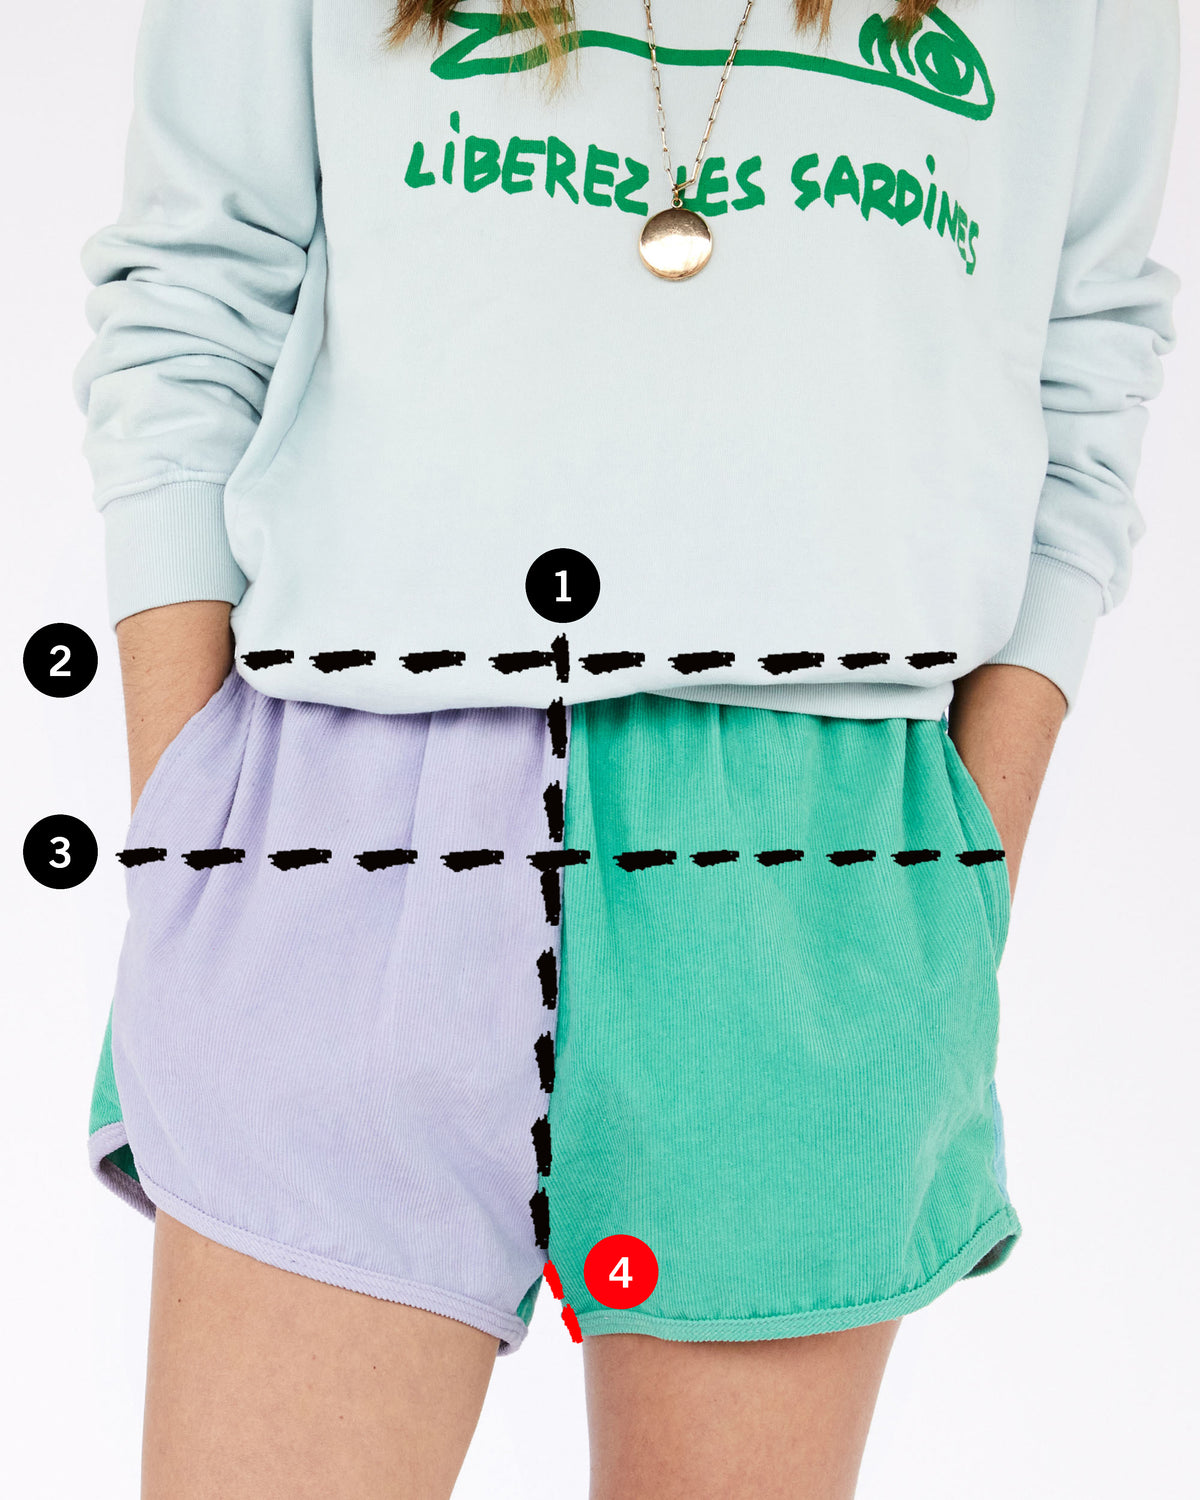 image of Frannie in a lavender and turquoise shorts with 4 lines depicting where the user should measure for their rise, waist, hip and inseam measurements in comparison to the garment